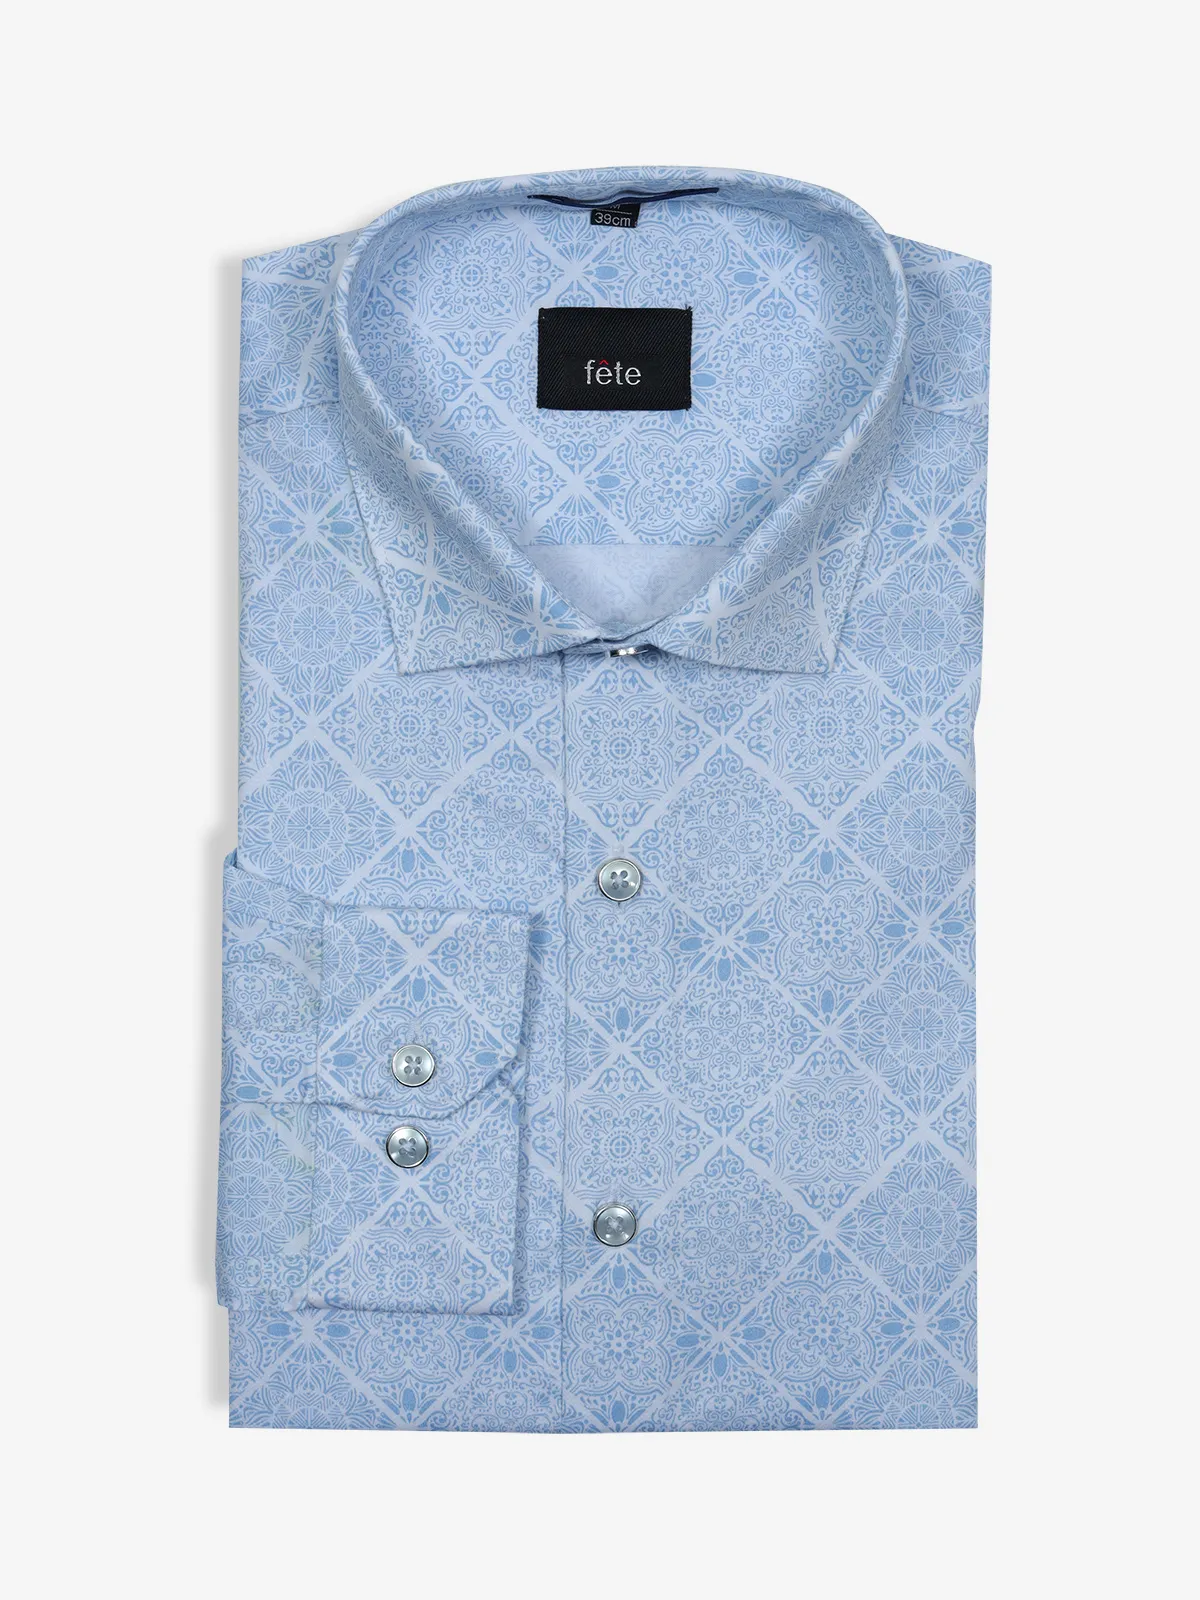 FETE white and blue cotton printed shirt